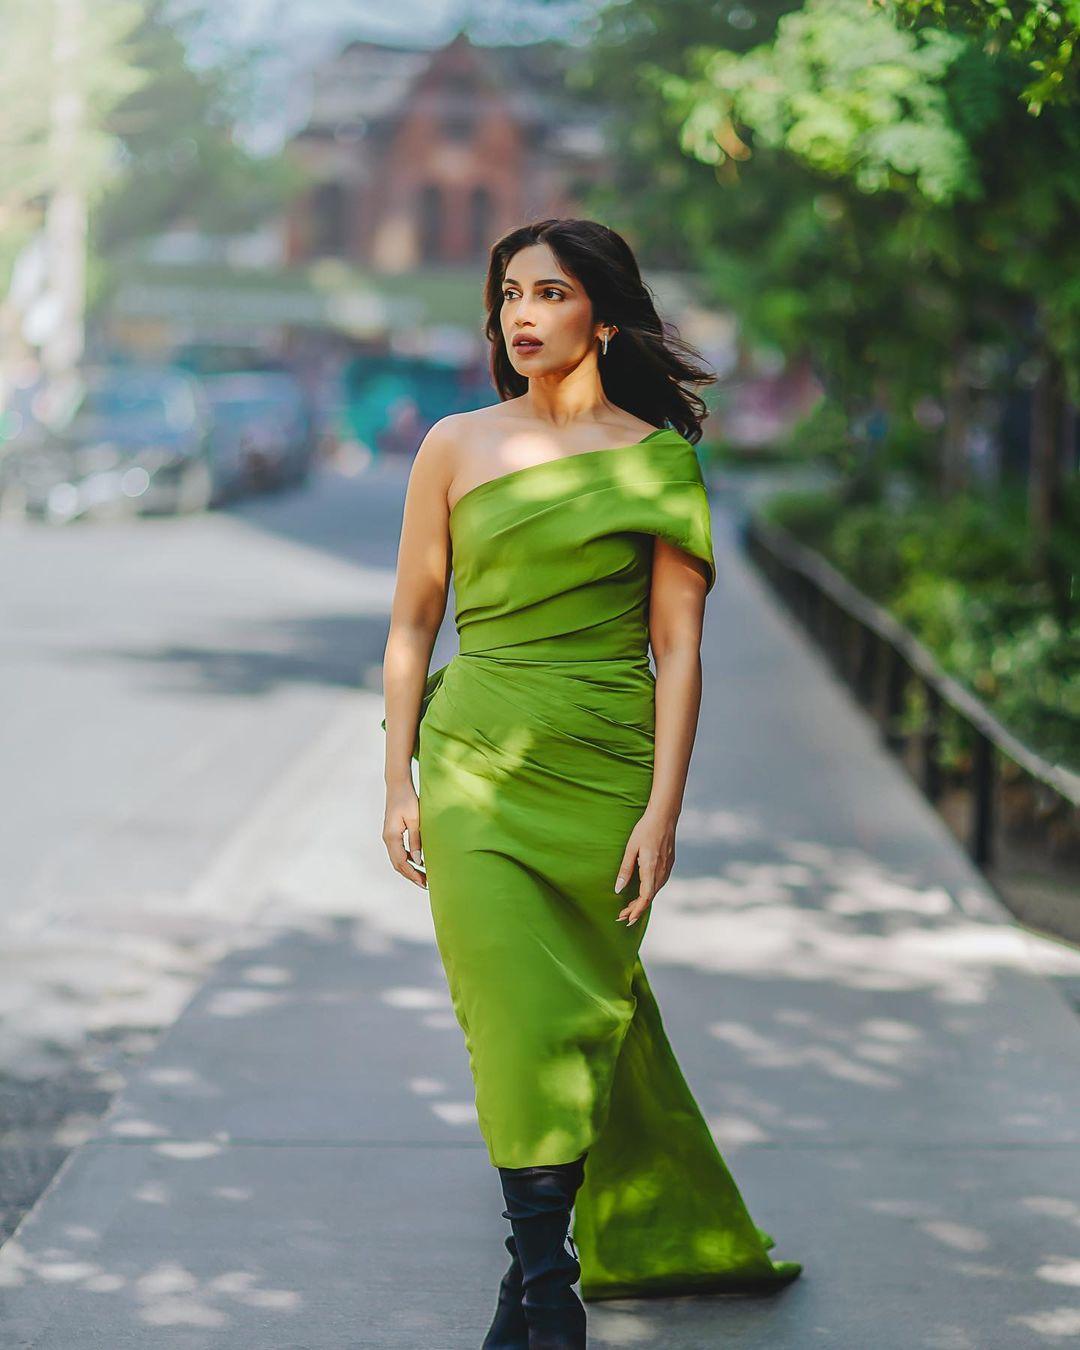 Bhumi Pednekar appears nothing short of a vision in her exquisite green Marchesa dress. To accentuate the dress's beauty, she opts for a nude beauty look